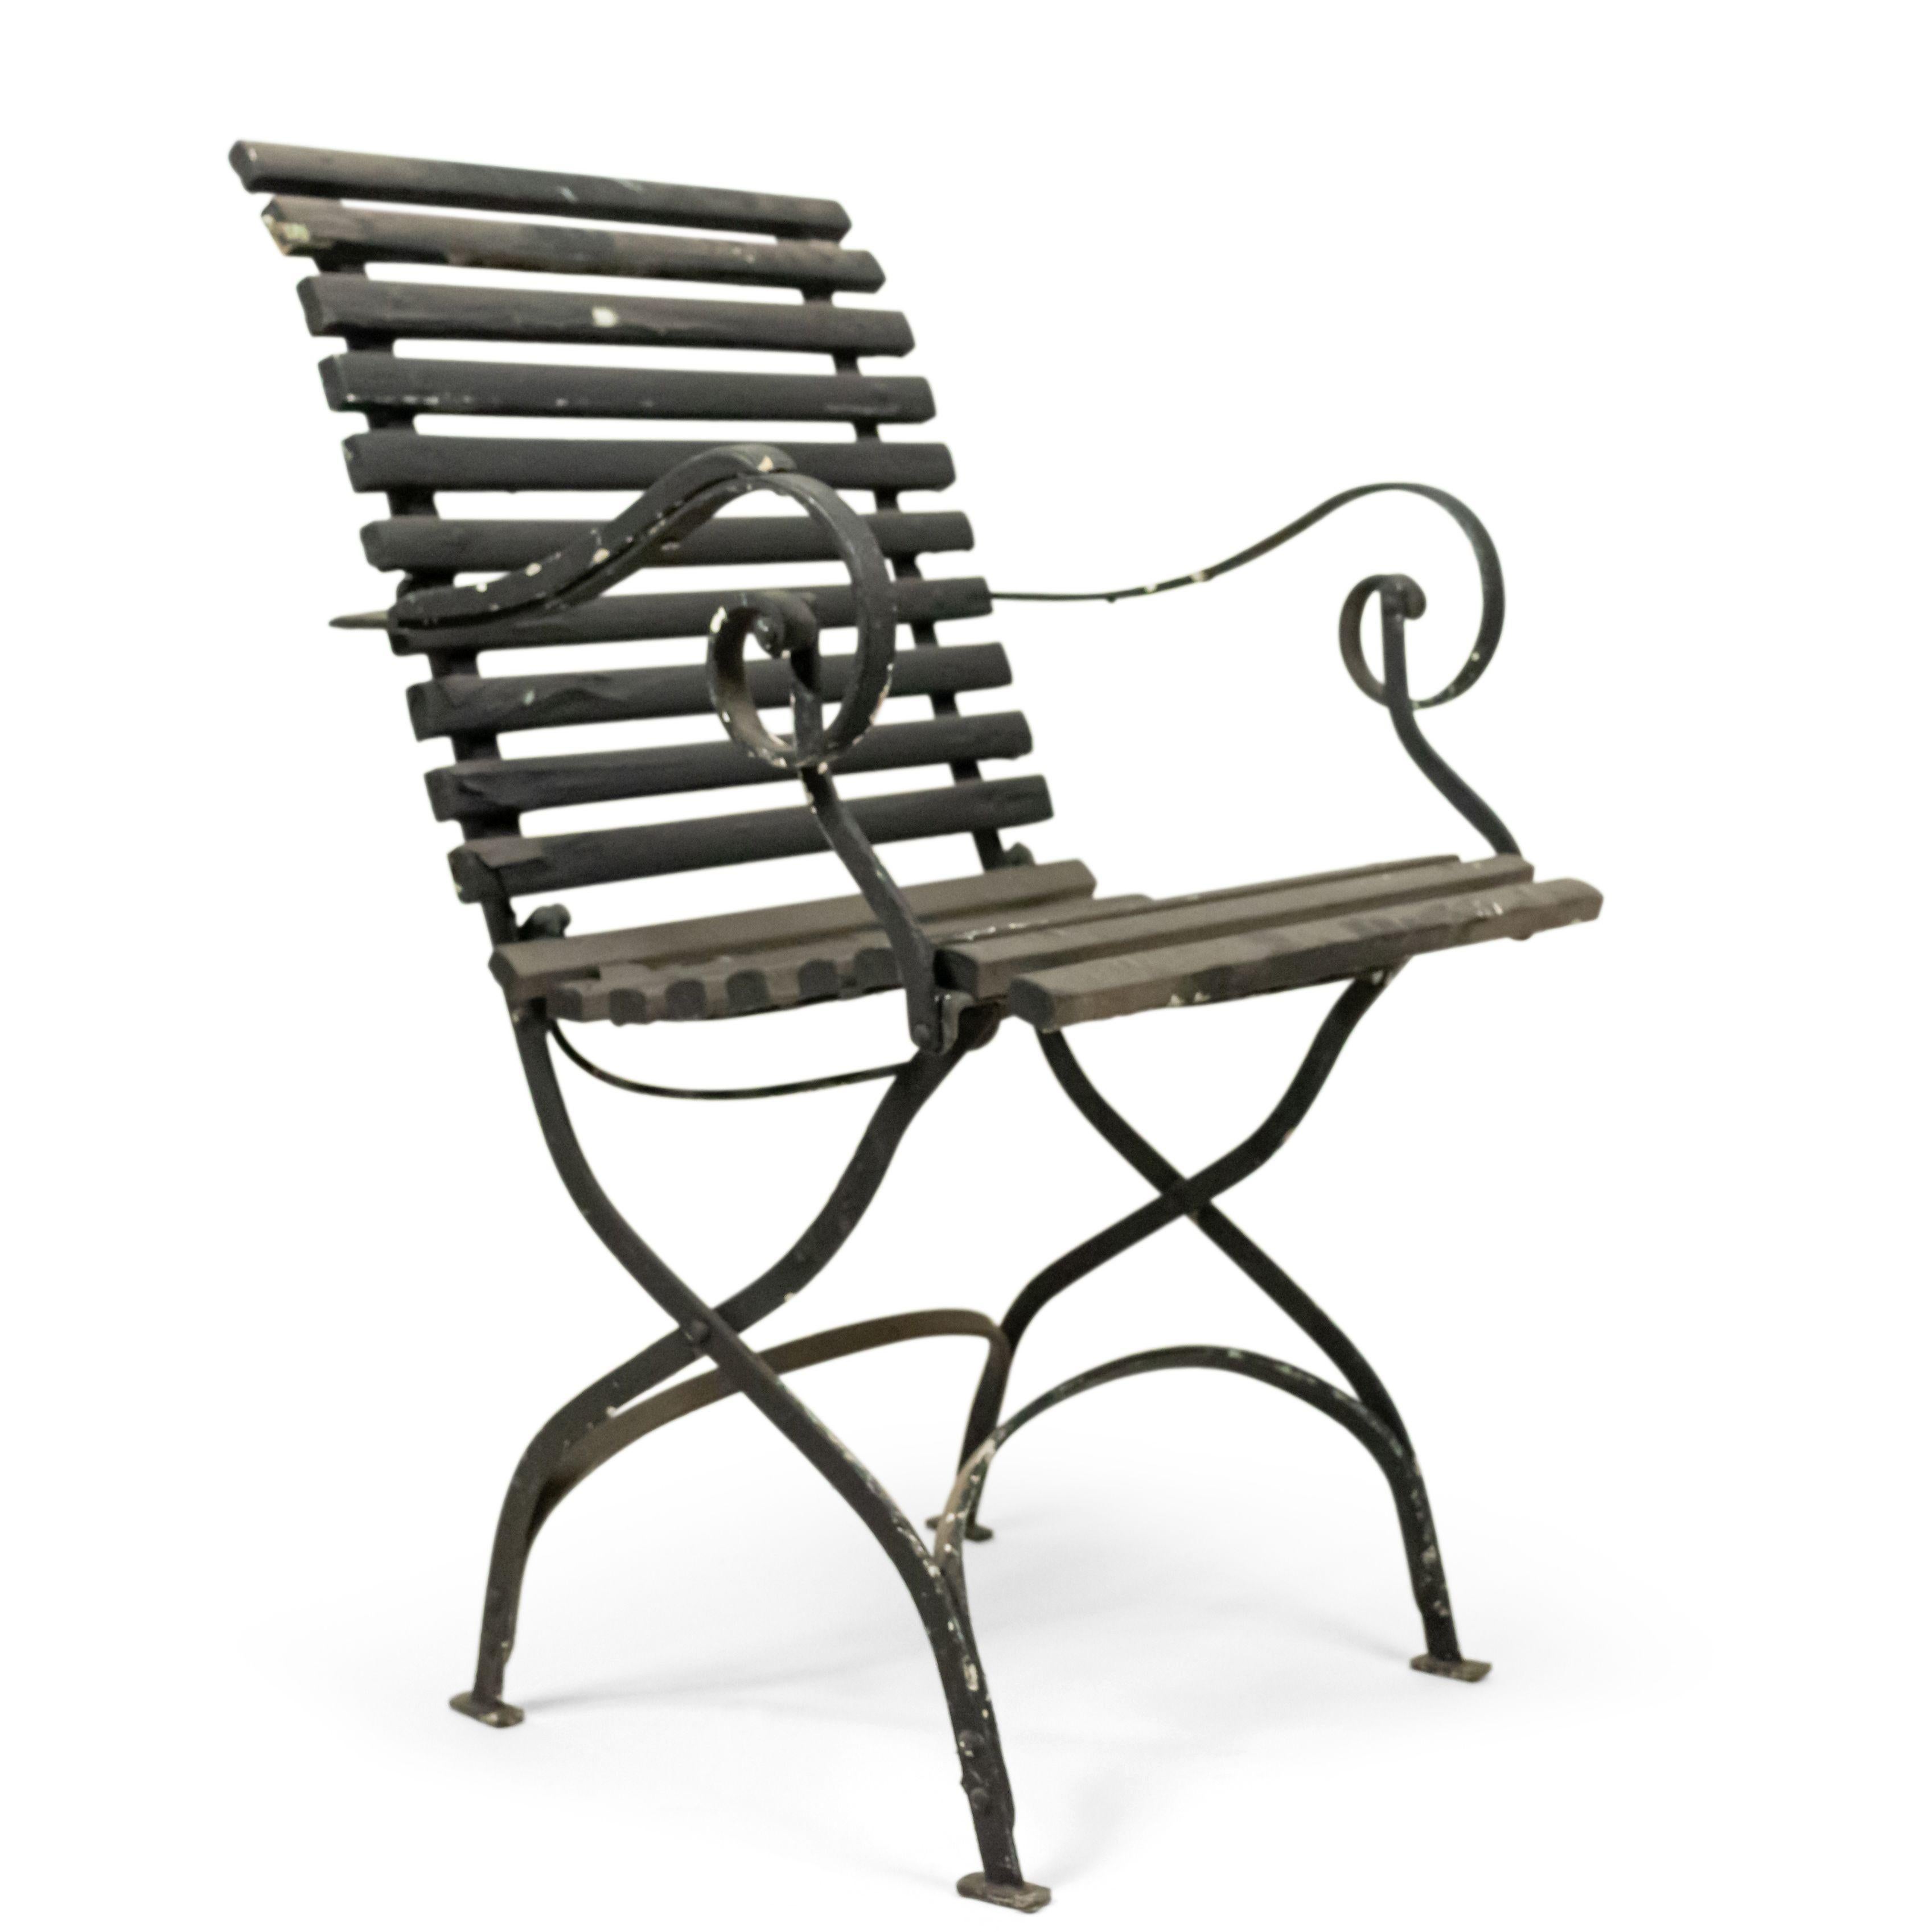 American Outdoor Iron Folding Chairs For Sale